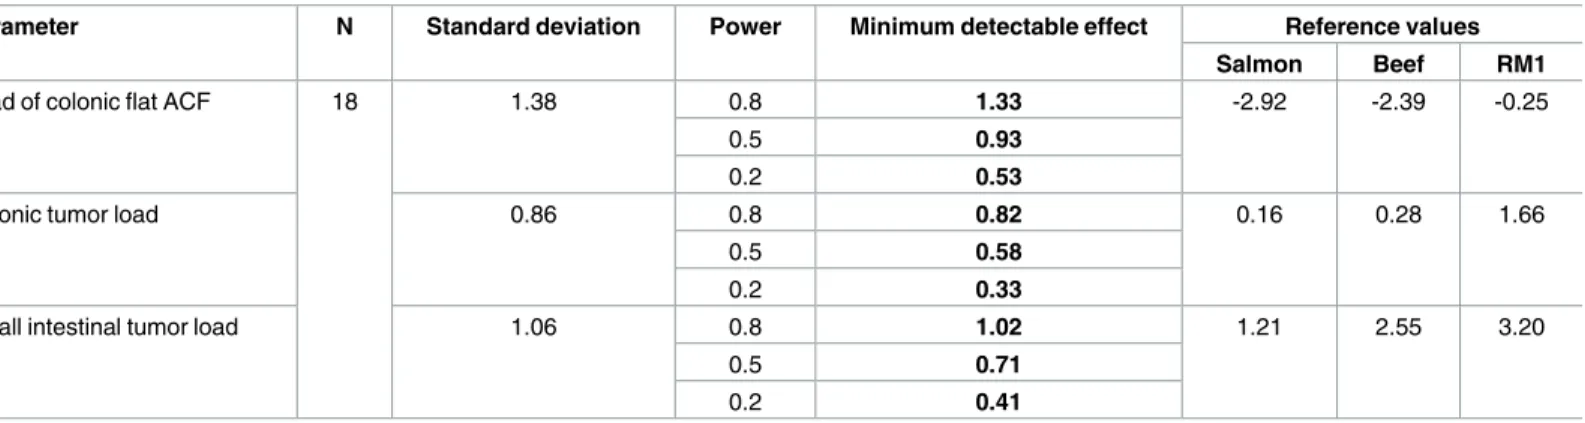 Table 5. Minimum detectable effect sizes for testing whether two means are different under the given circumstances of the present study (load of flat ACF, load of colonic tumors and load of small intestinal tumors (log-transformed)).